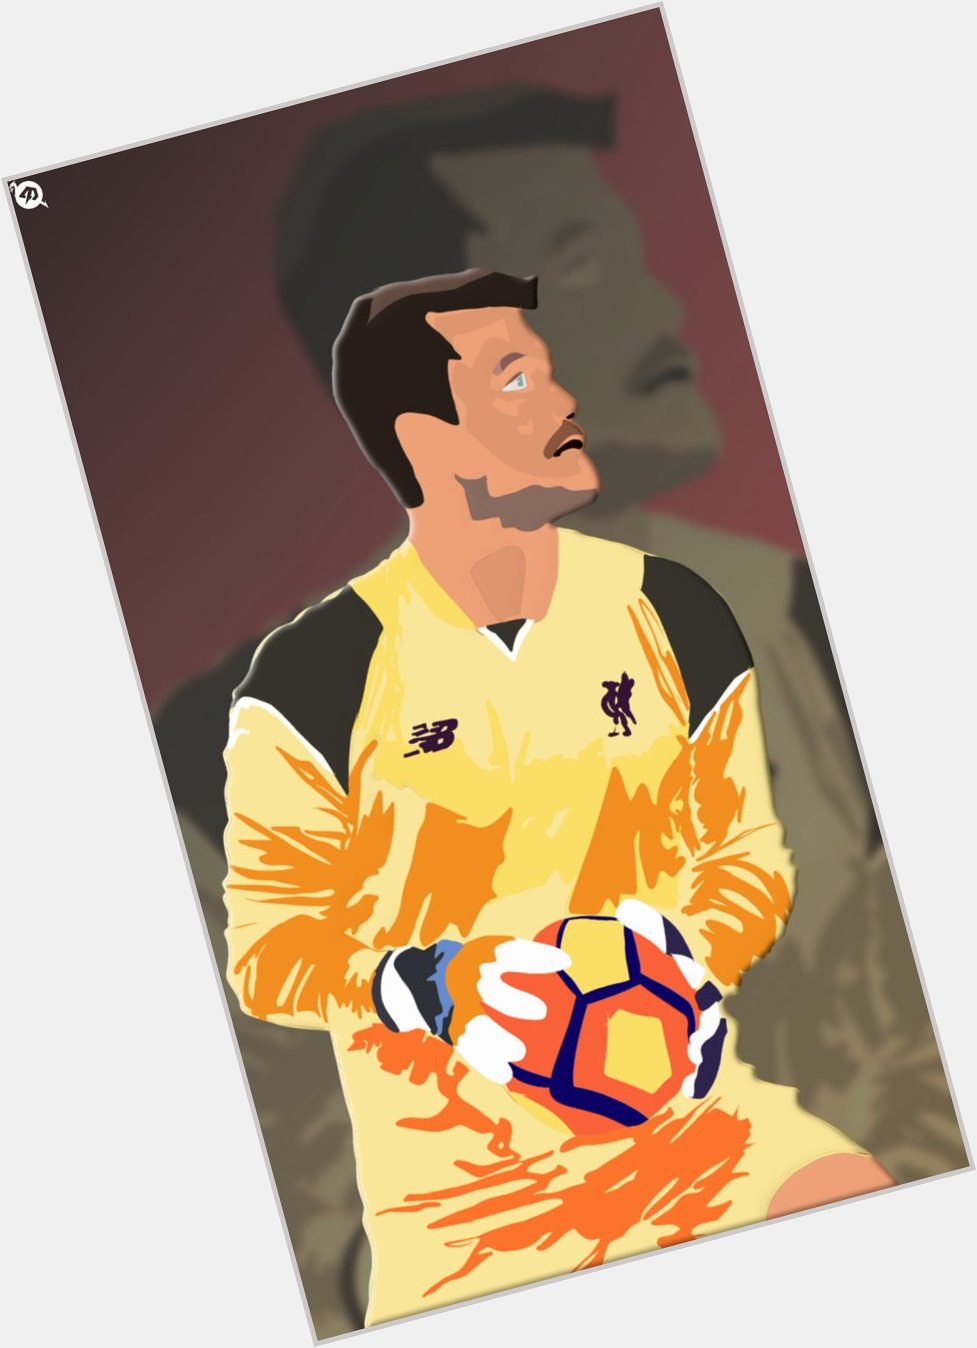 Happy birthday to our shot stopper simon mignolet . 
Likes and RTs appreciated 